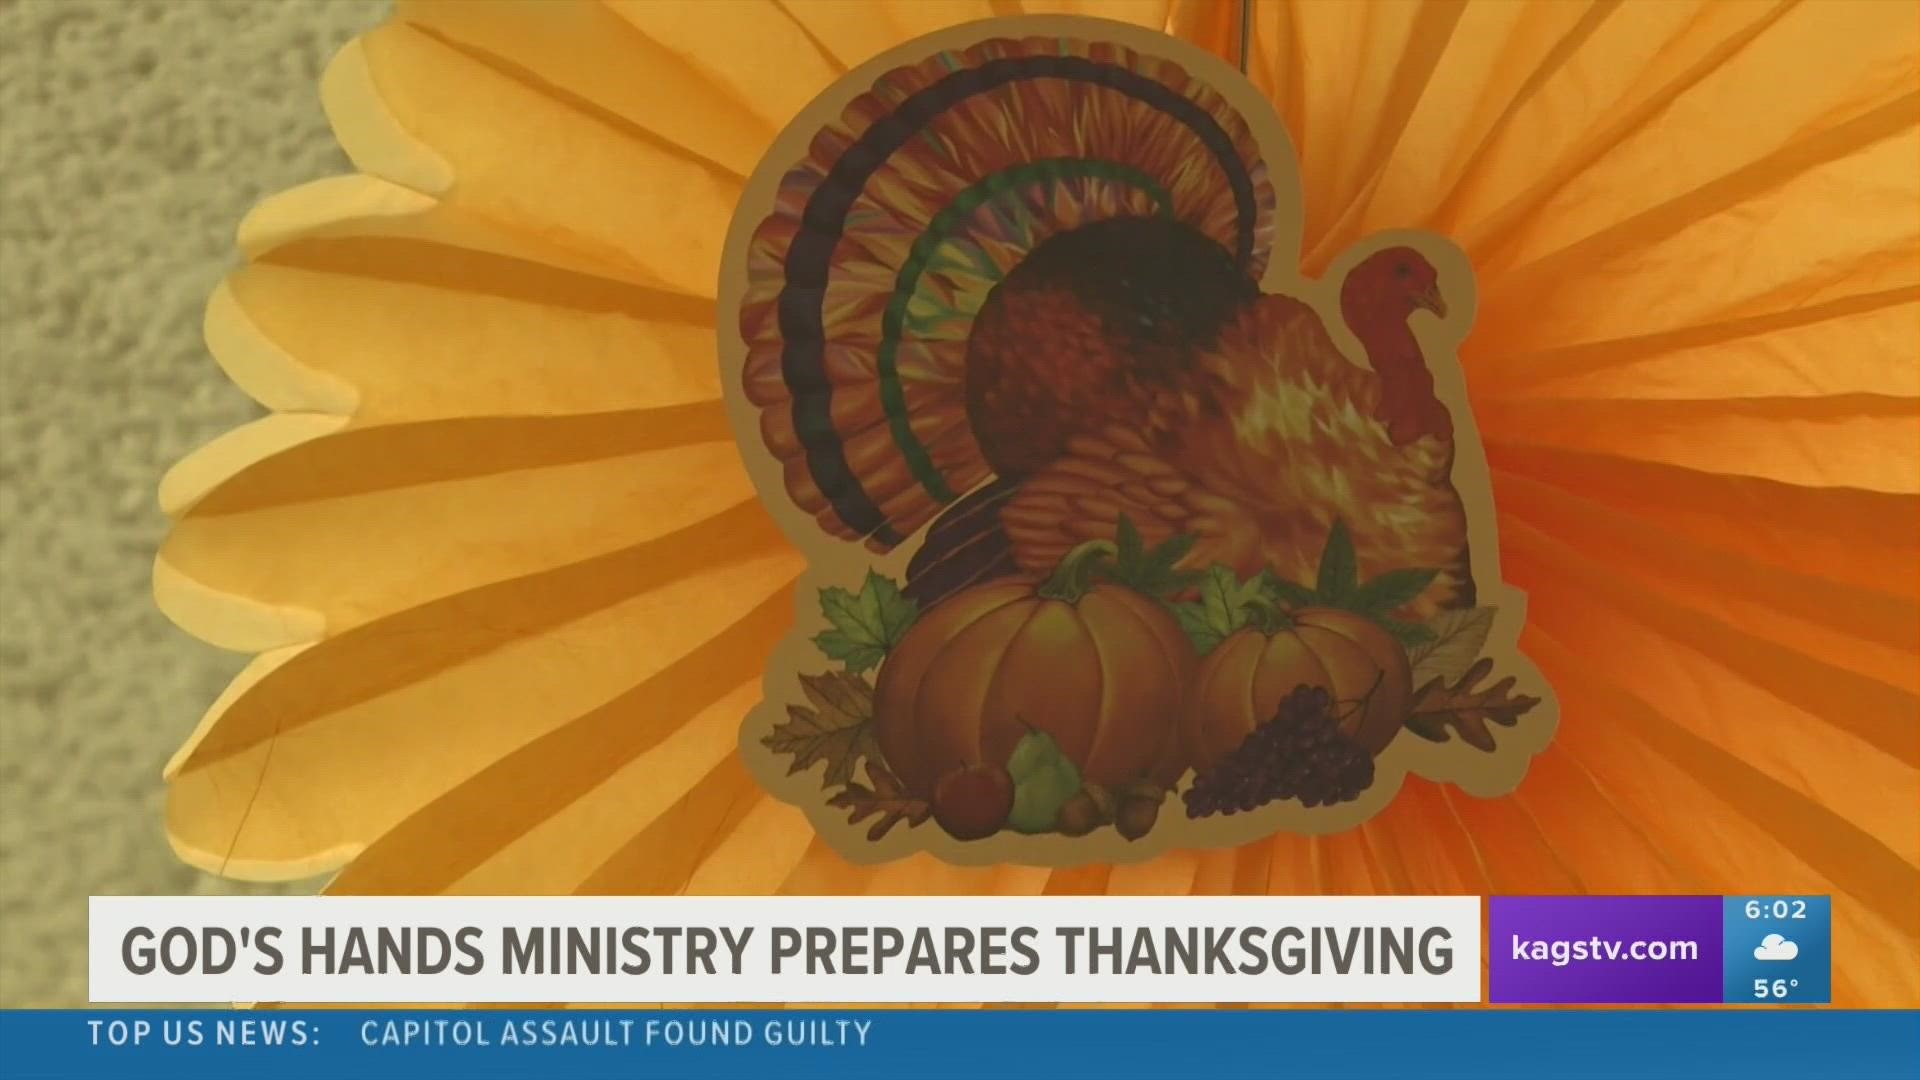 In God's Hands Ministry in Burleson County expects to feed more than 100 families on Thanksgiving evening.